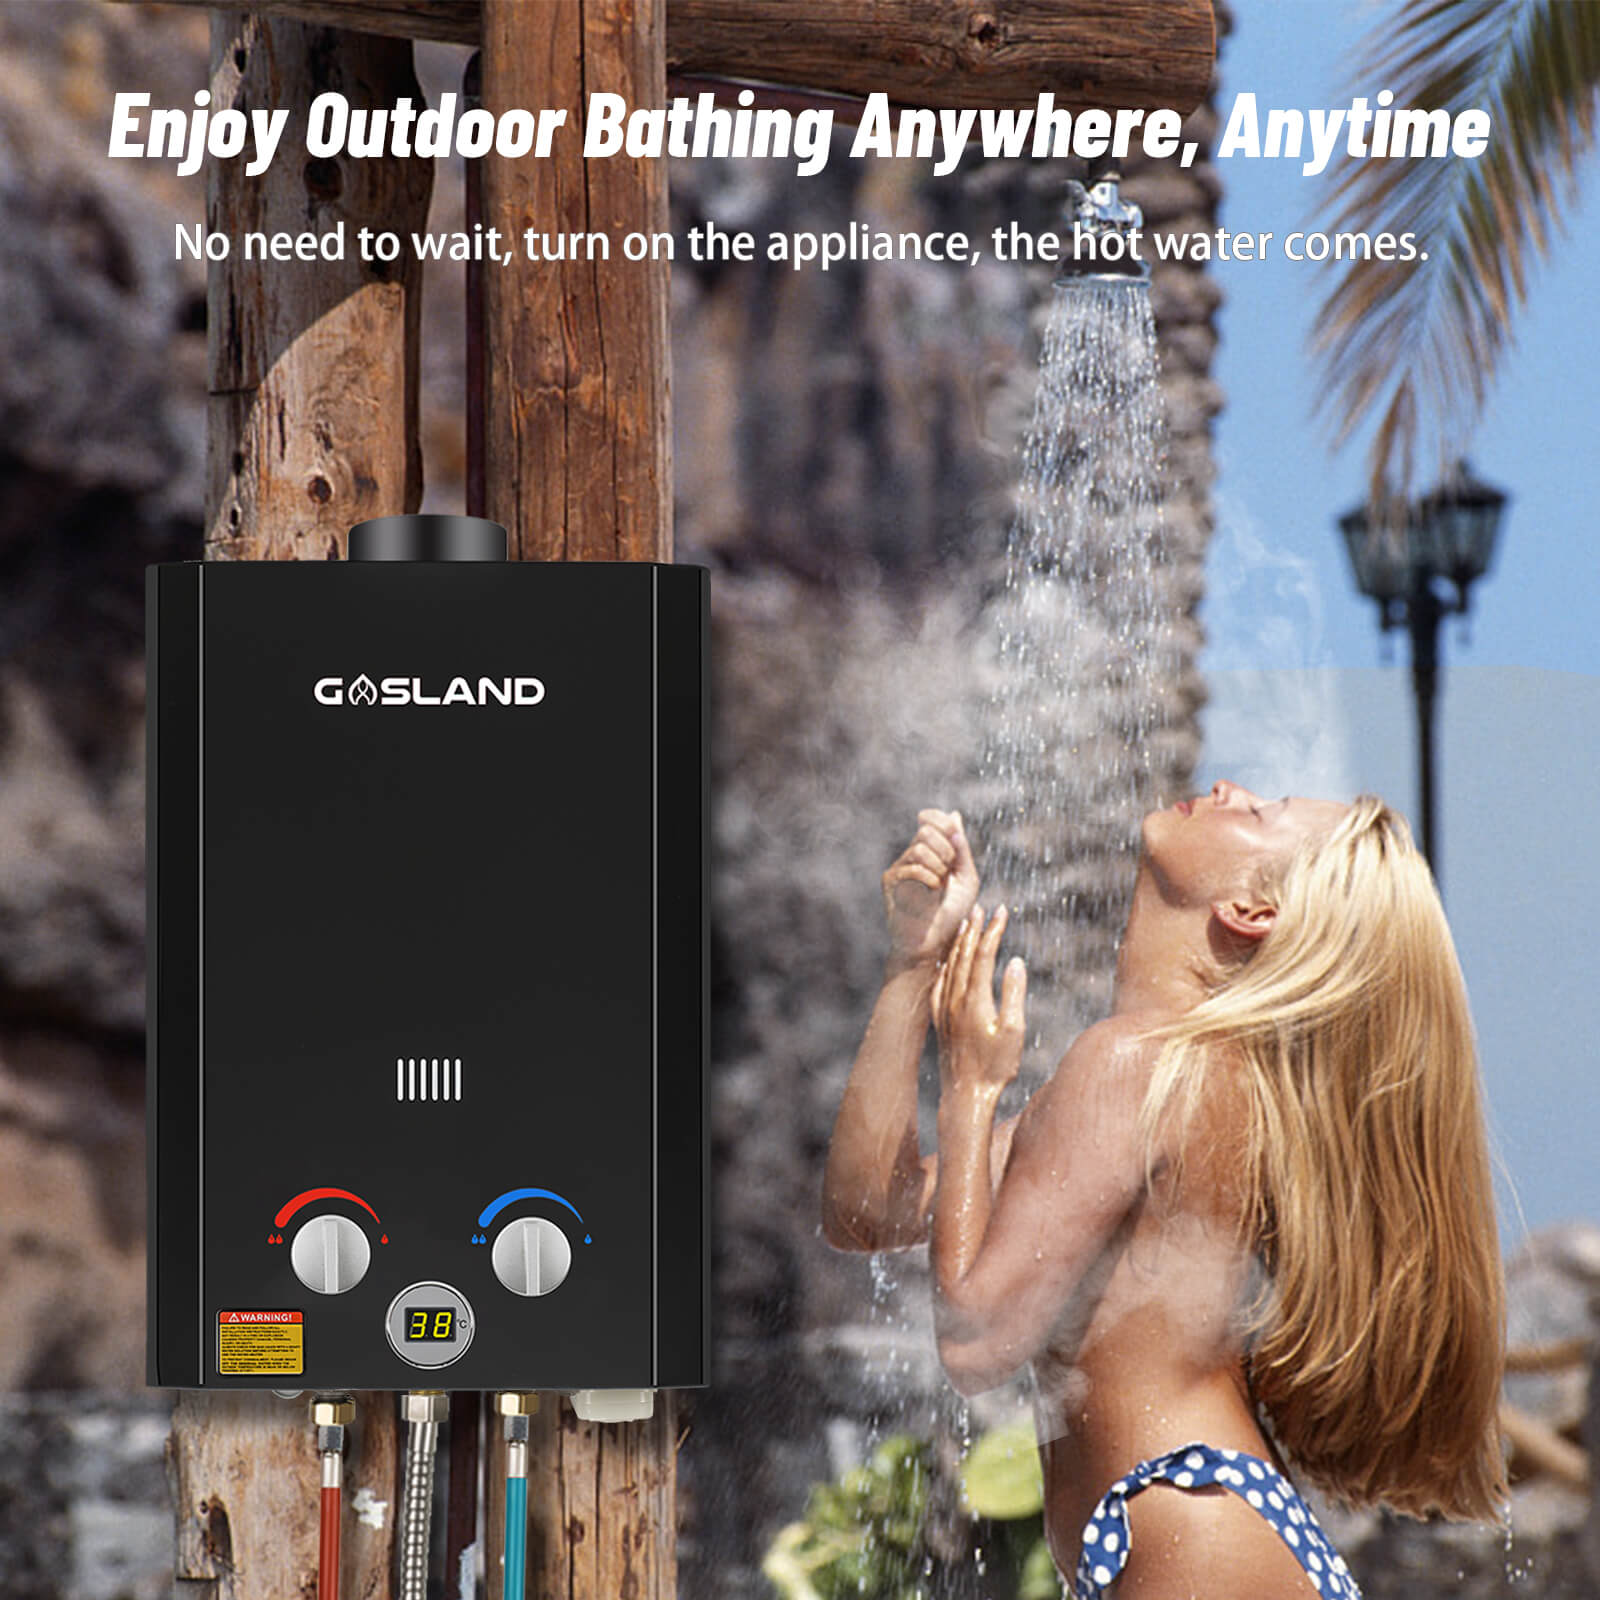 GASLAND BE264B 10L Gas Water Heater, Outdoor Tankless Hot Shower System with Digital Display, Instant LPG Water Boiler for Campervan Shower Road Trip Hot Tap Lpg Shower